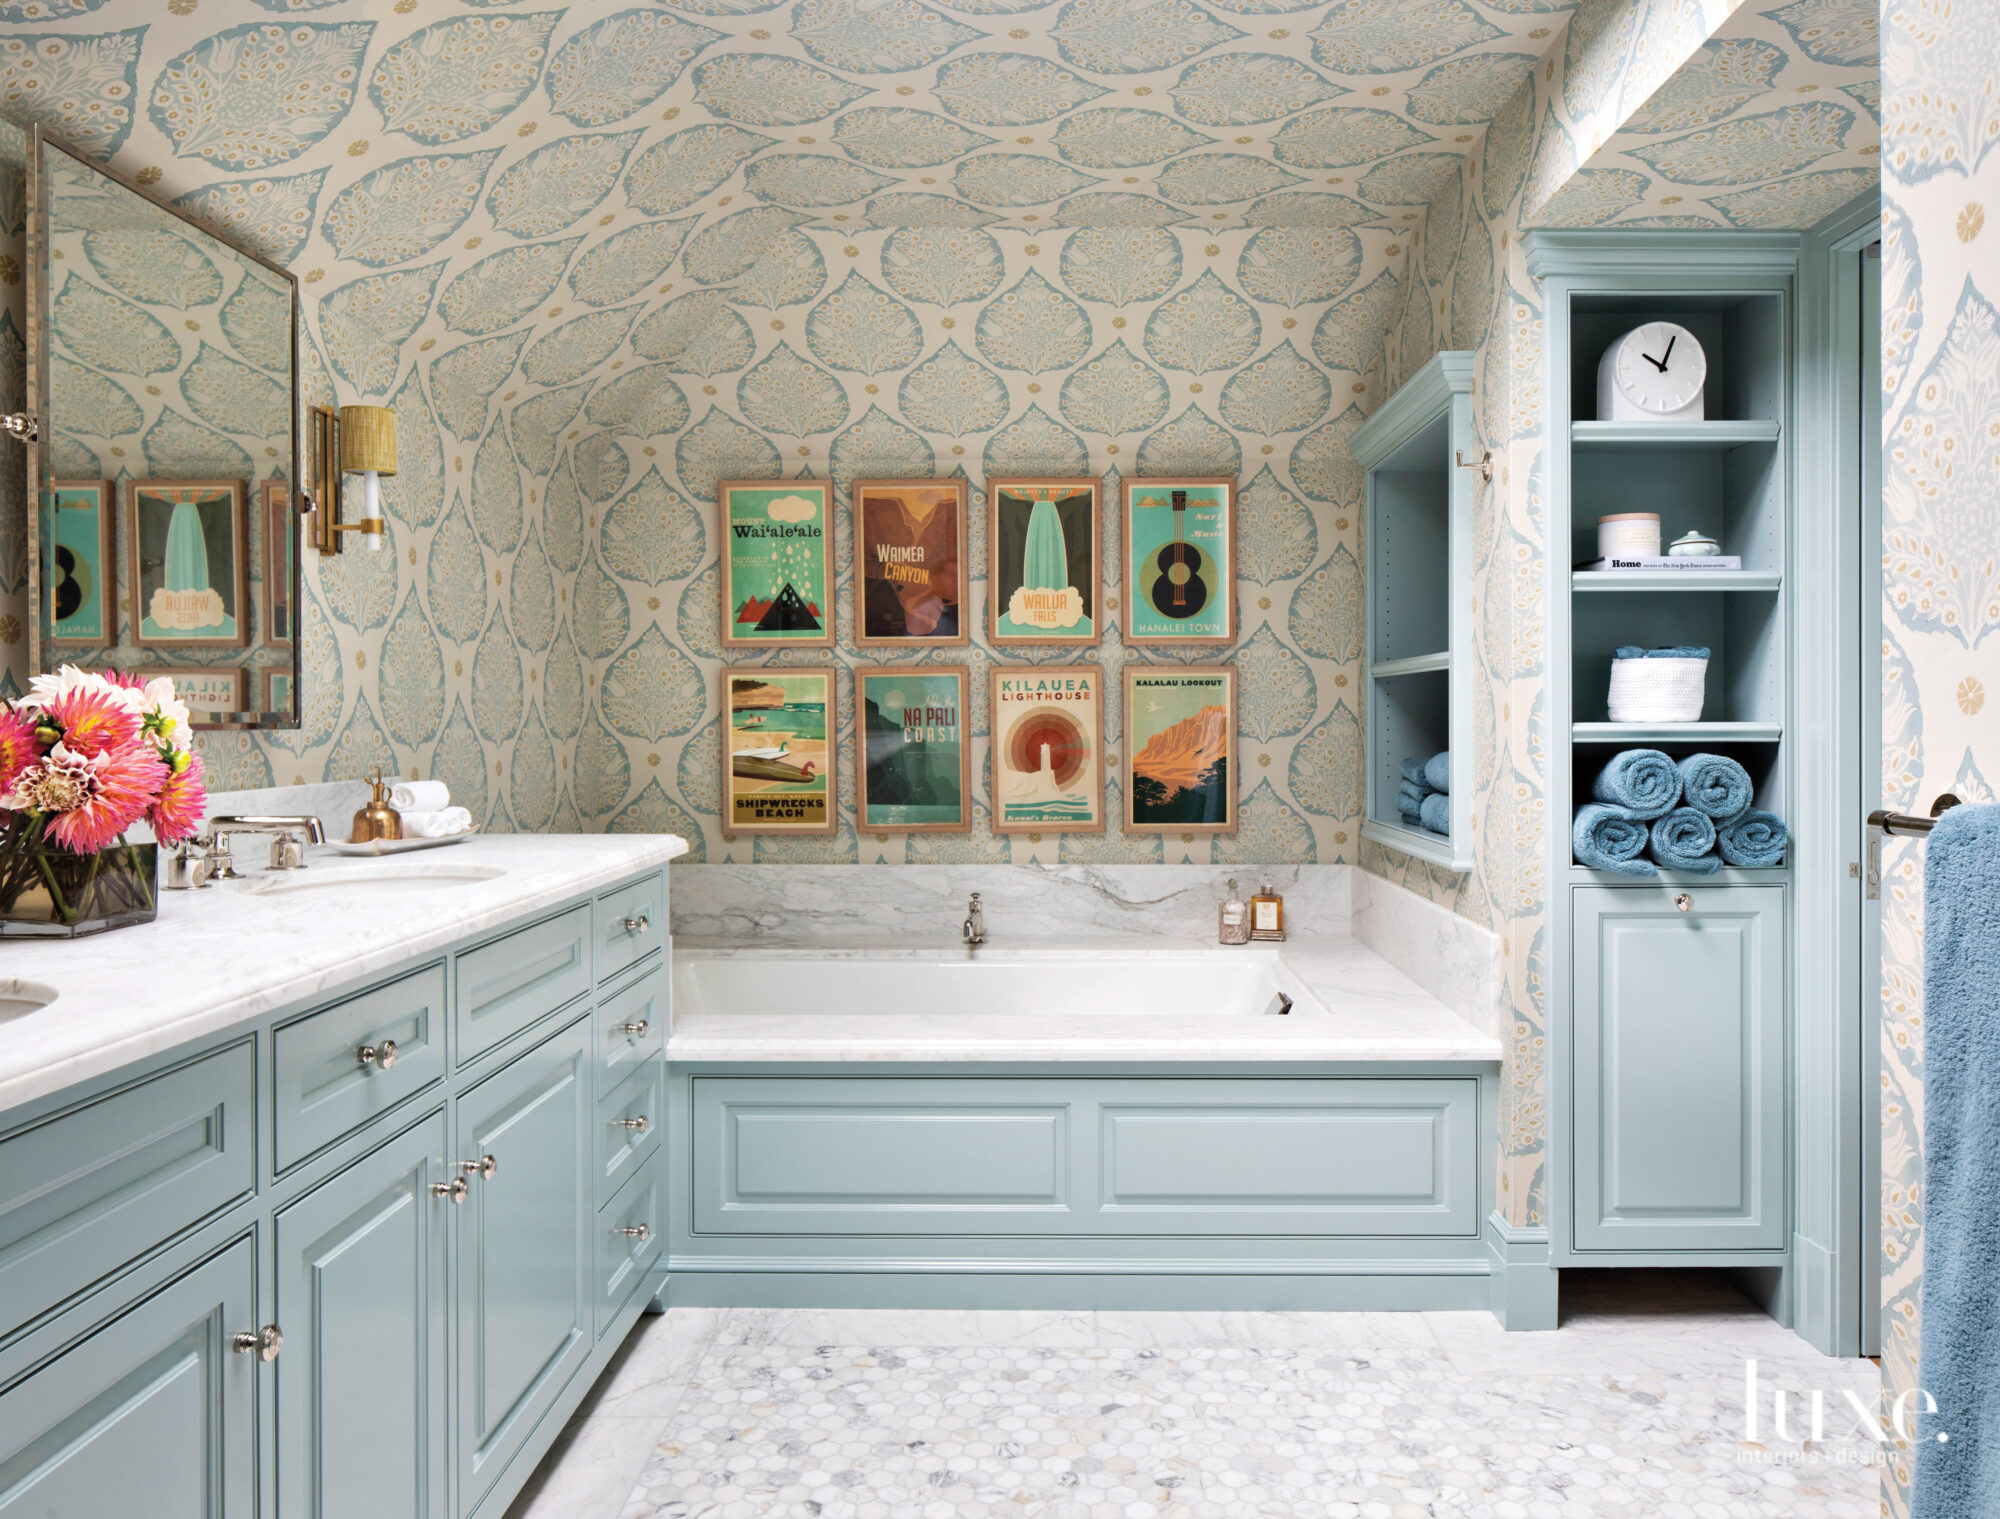 In the primary bathroom, a charming collection of vintage prints hang above the tub. The cabinetry is light blue.